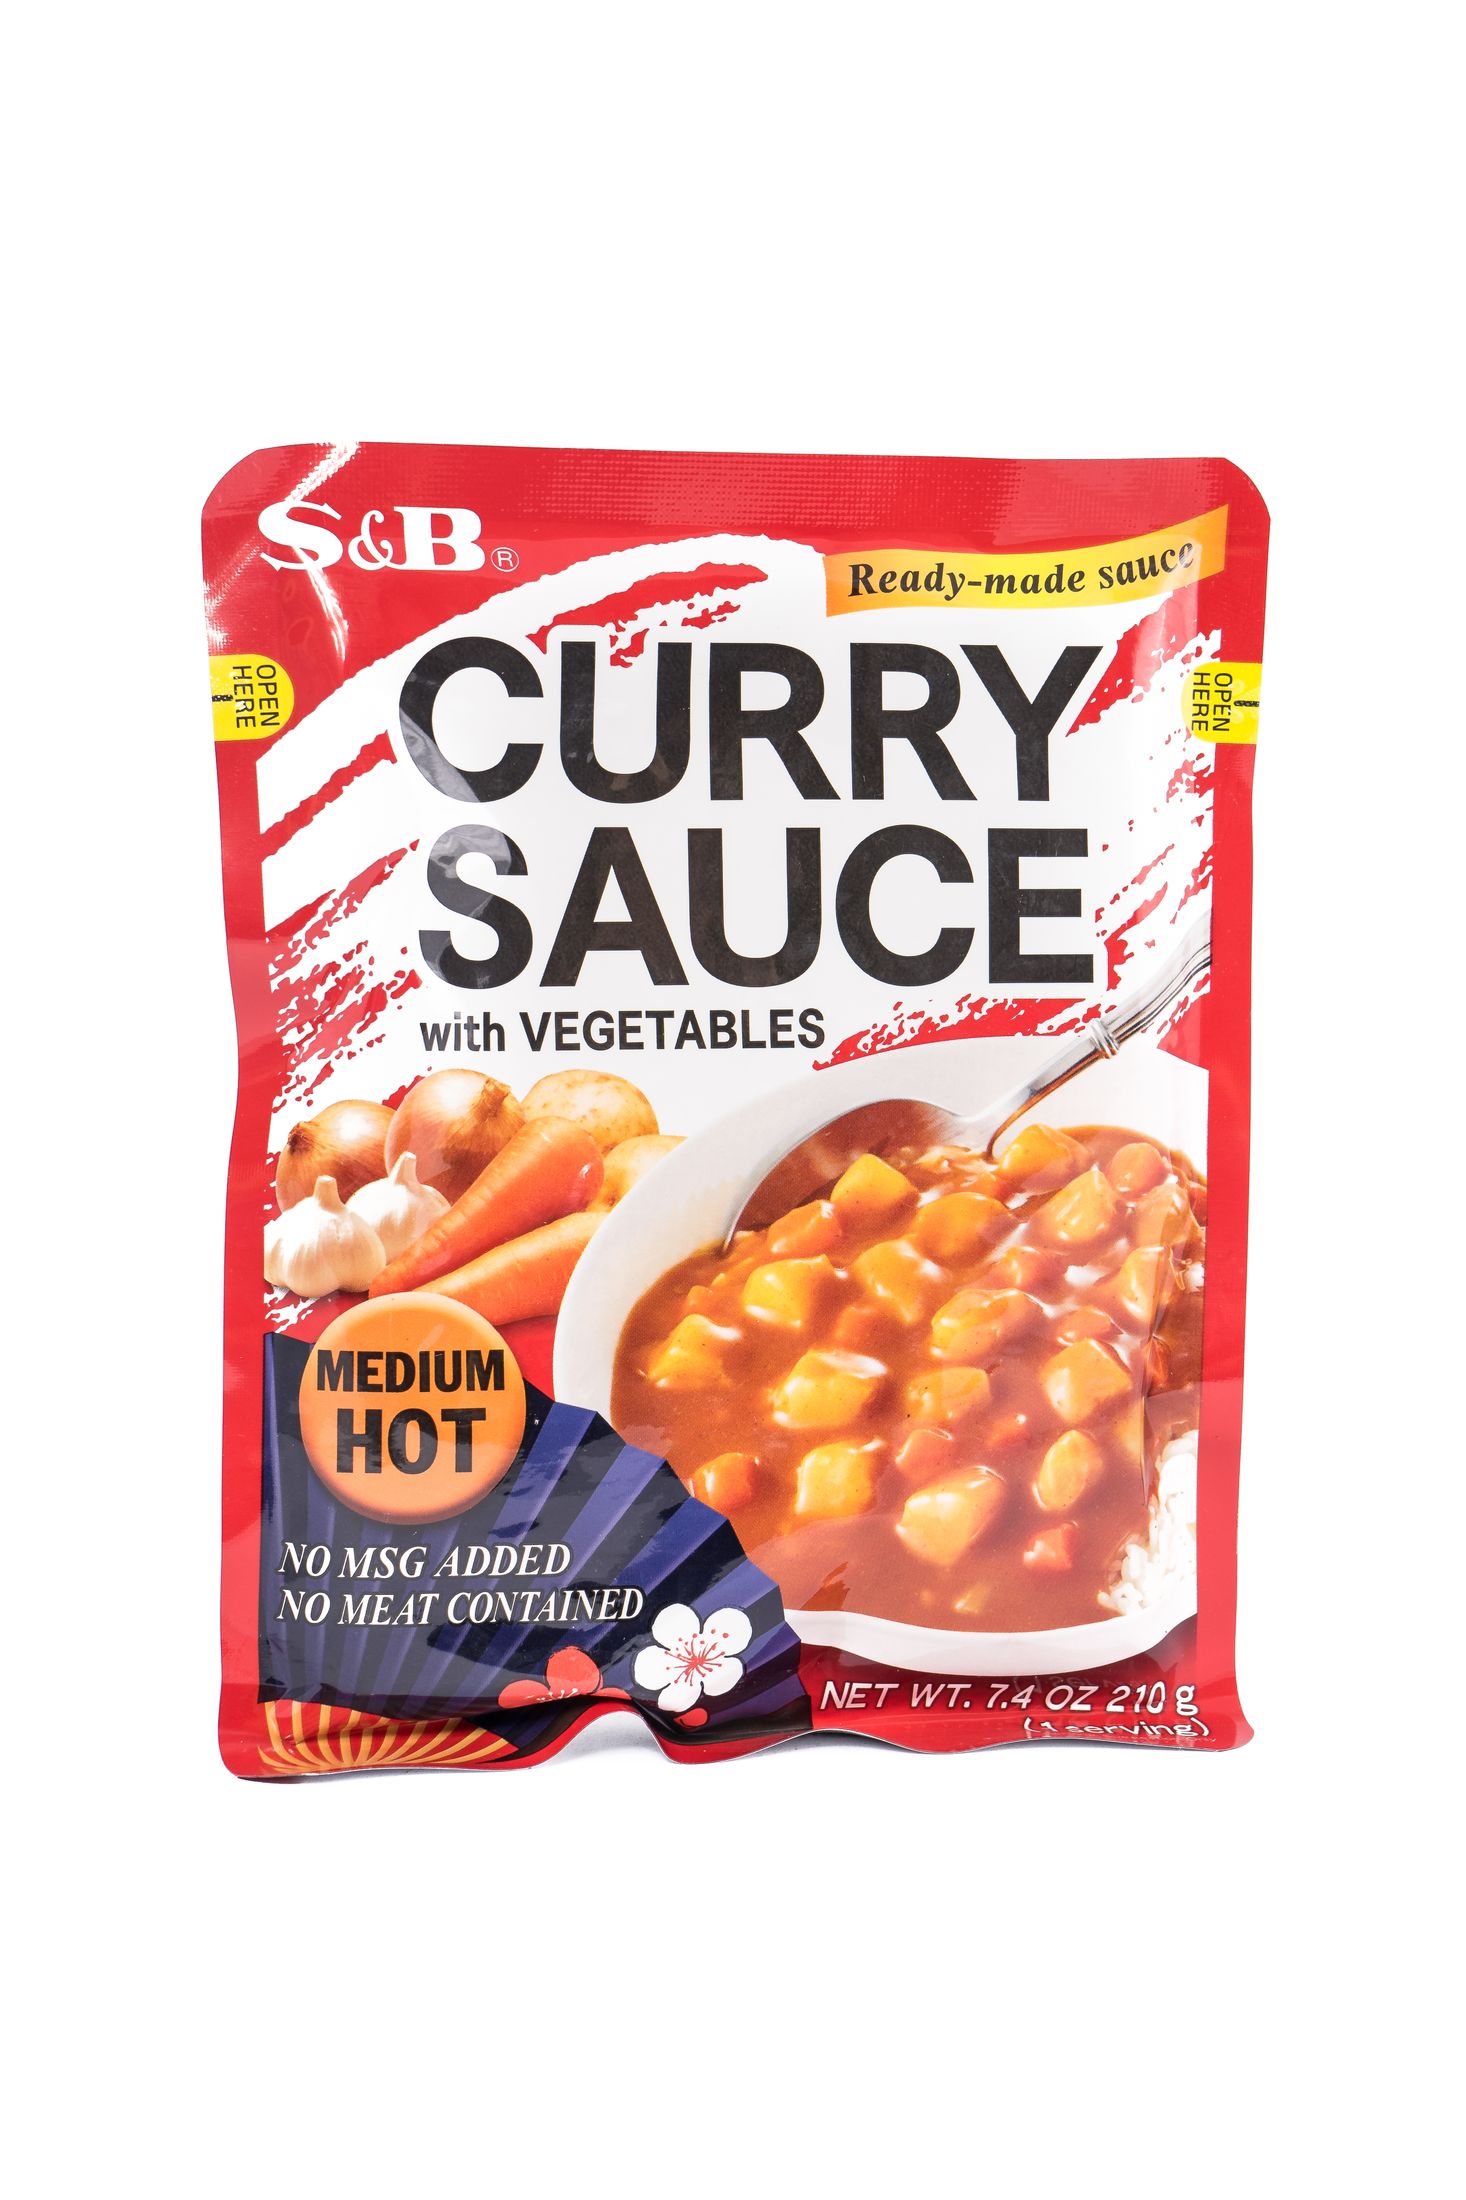 S&B Japanese curry sauce with vegetables (medium hot)